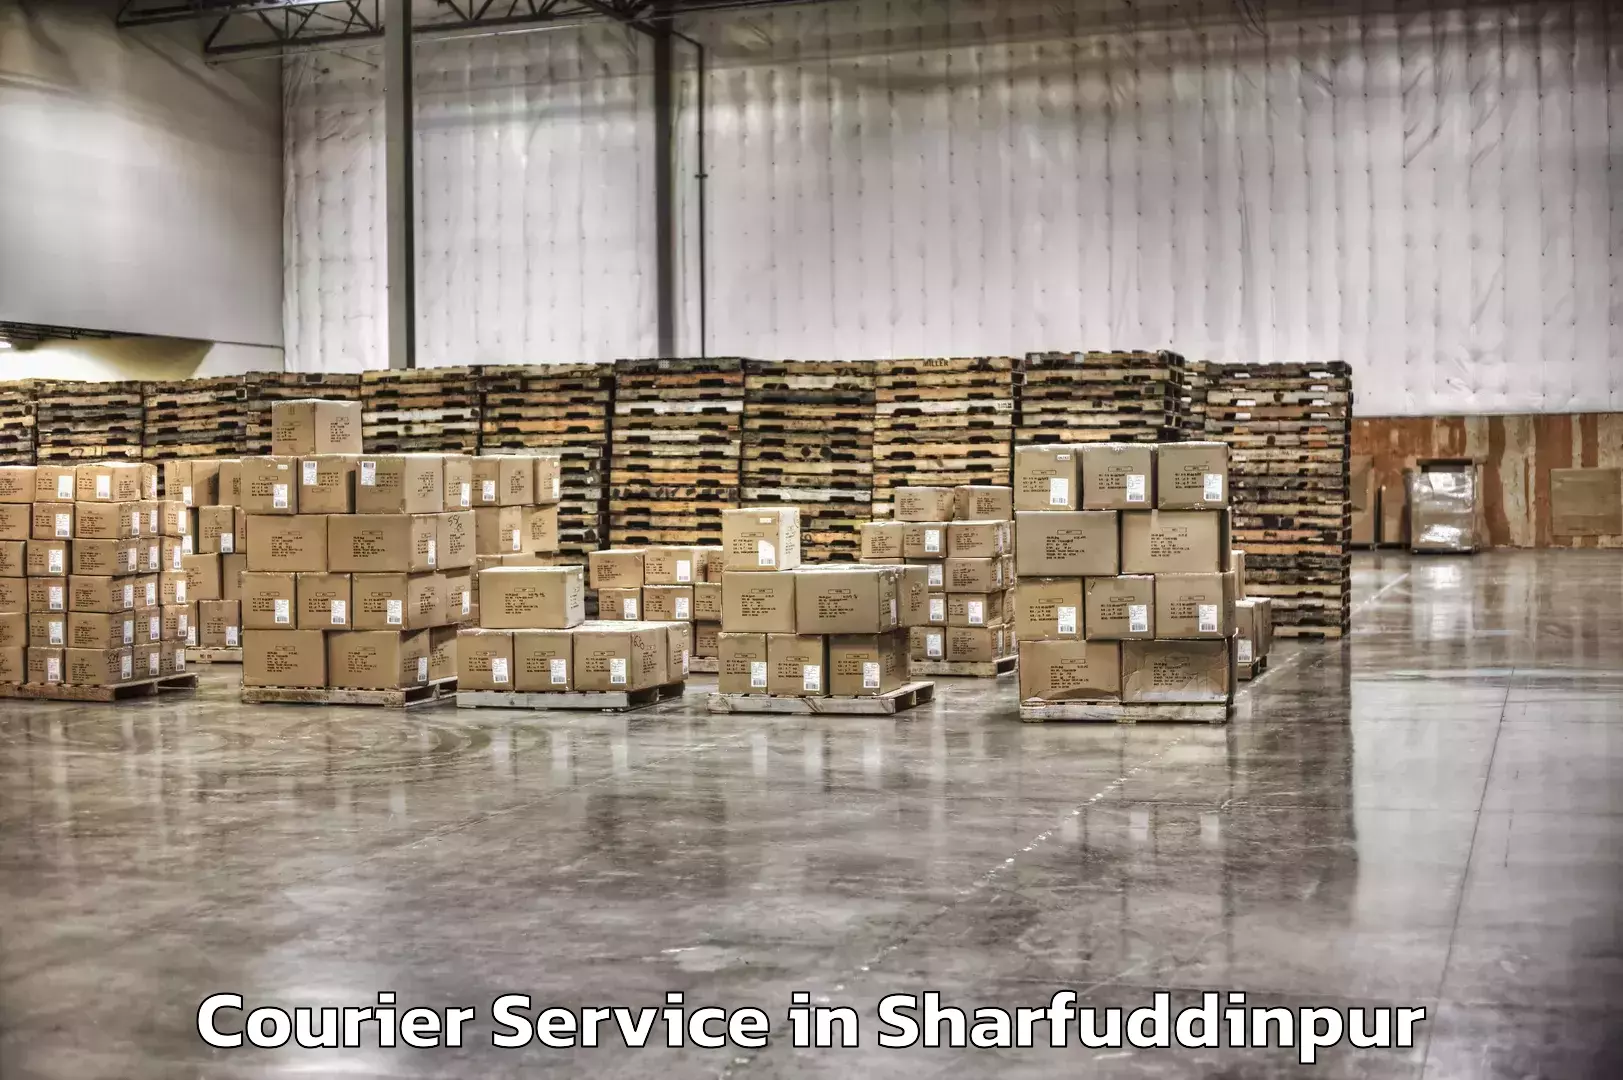 Affordable shipping rates in Sharfuddinpur